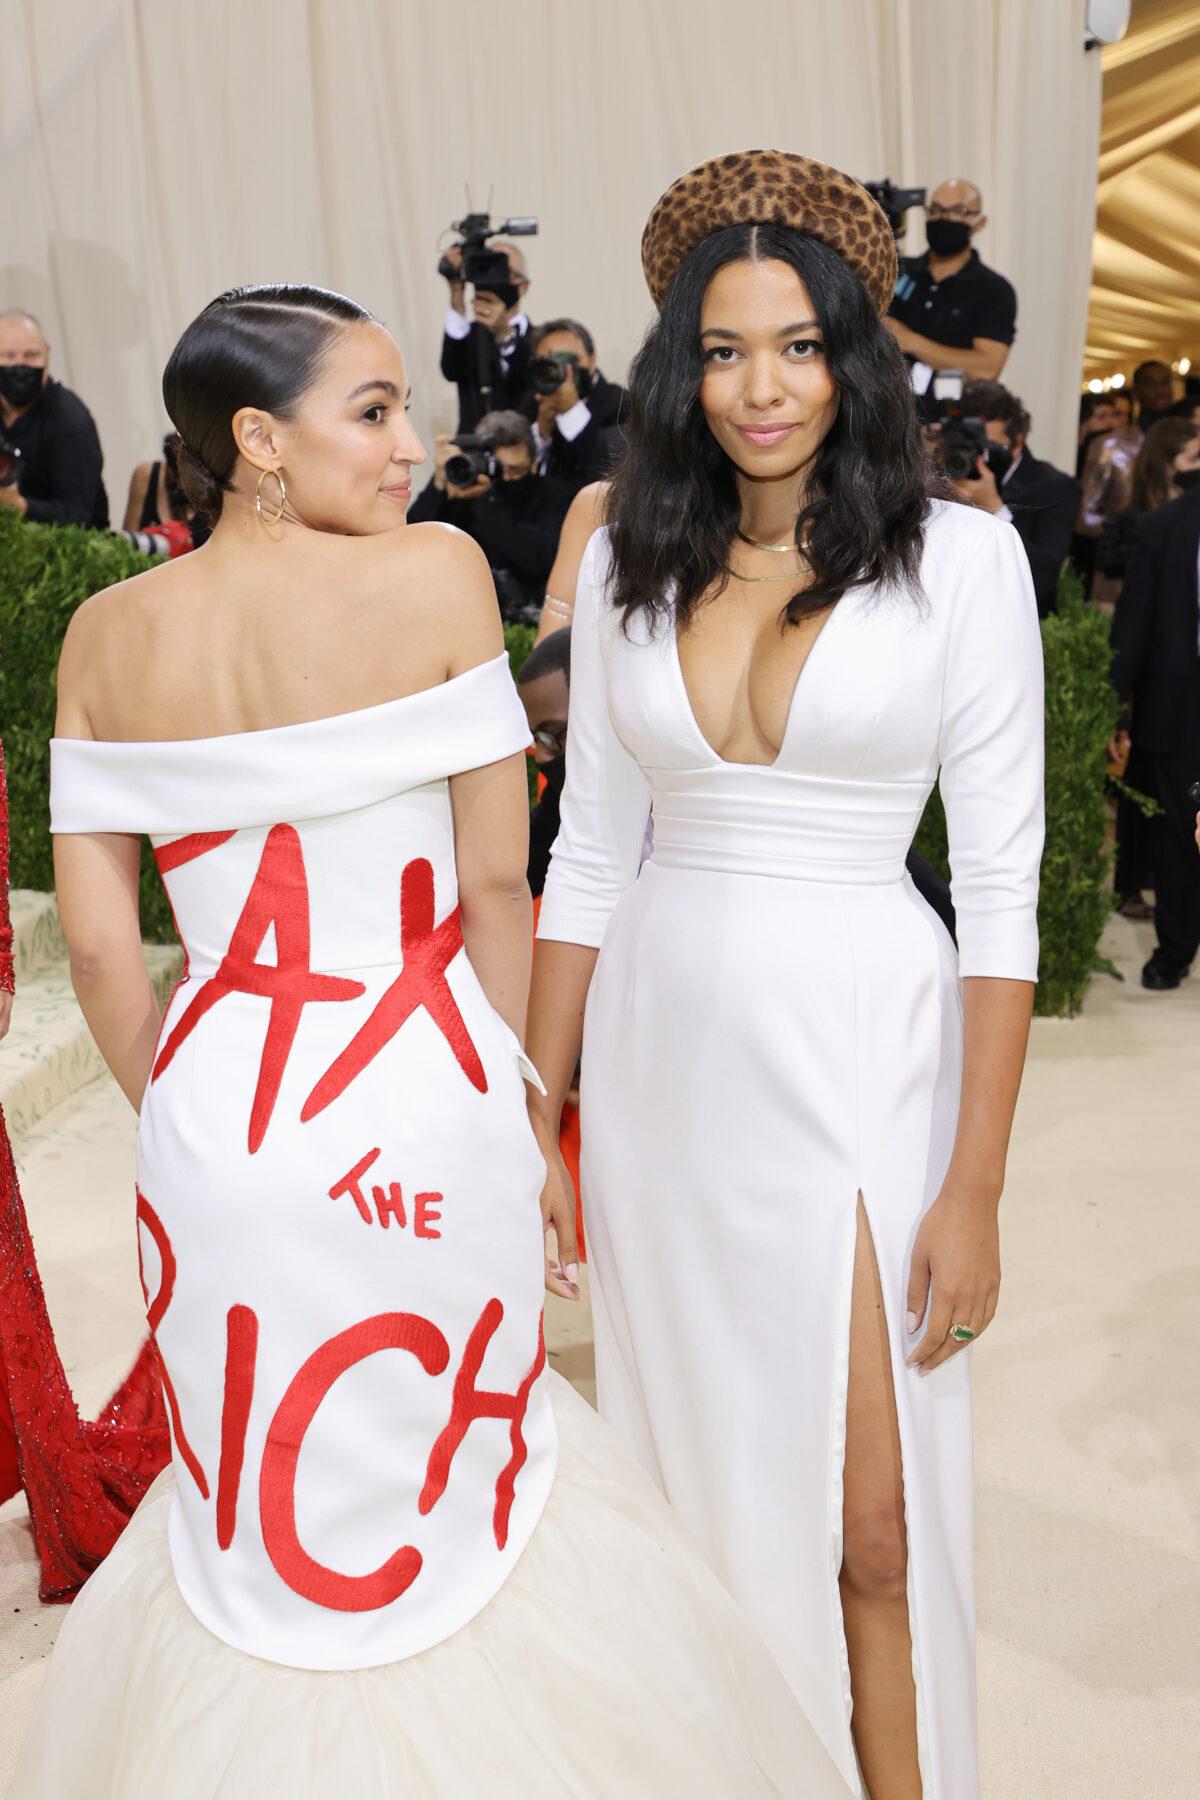 Alexandria Ocasio-Cortez and Aurora James attend The 2021 Met Gala Celebrating in America: A Lexicon of Fashion at Metropolitan Museum of Art in New York City on Sept. 13, 2021. (Mike Coppola/Getty Images)